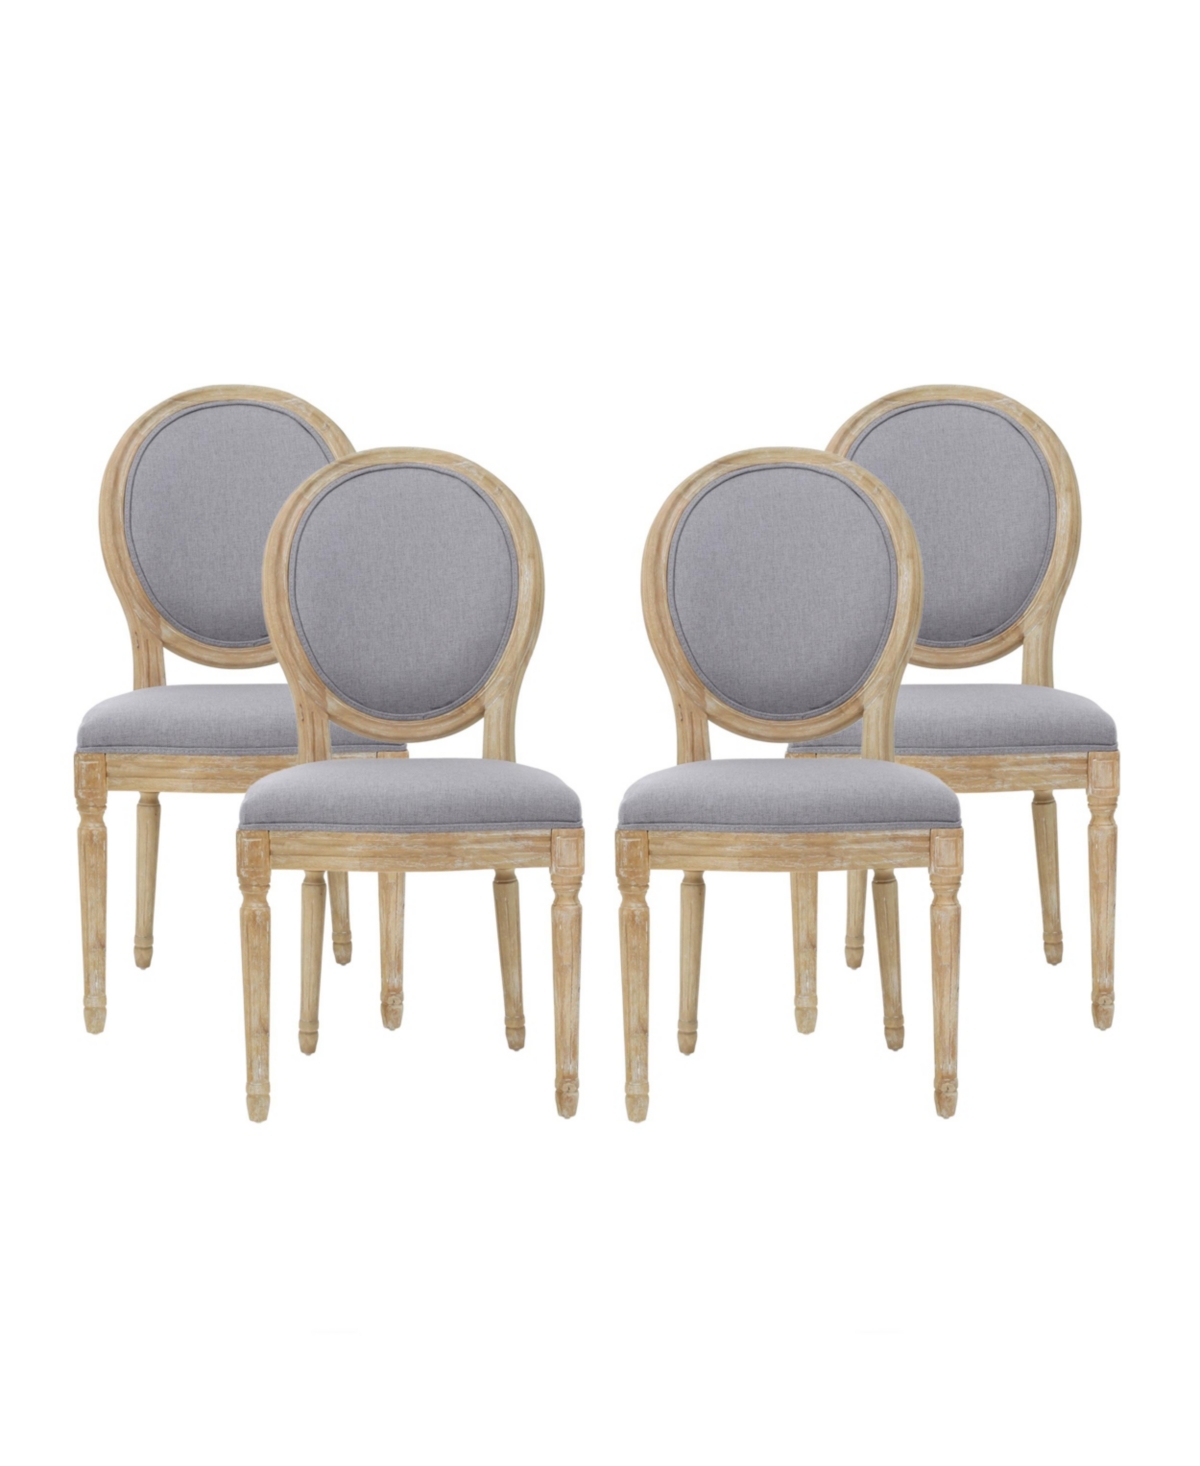 Noble House Phinnaeus French Country Dining Chairs Set, 4 Piece In Light Gray